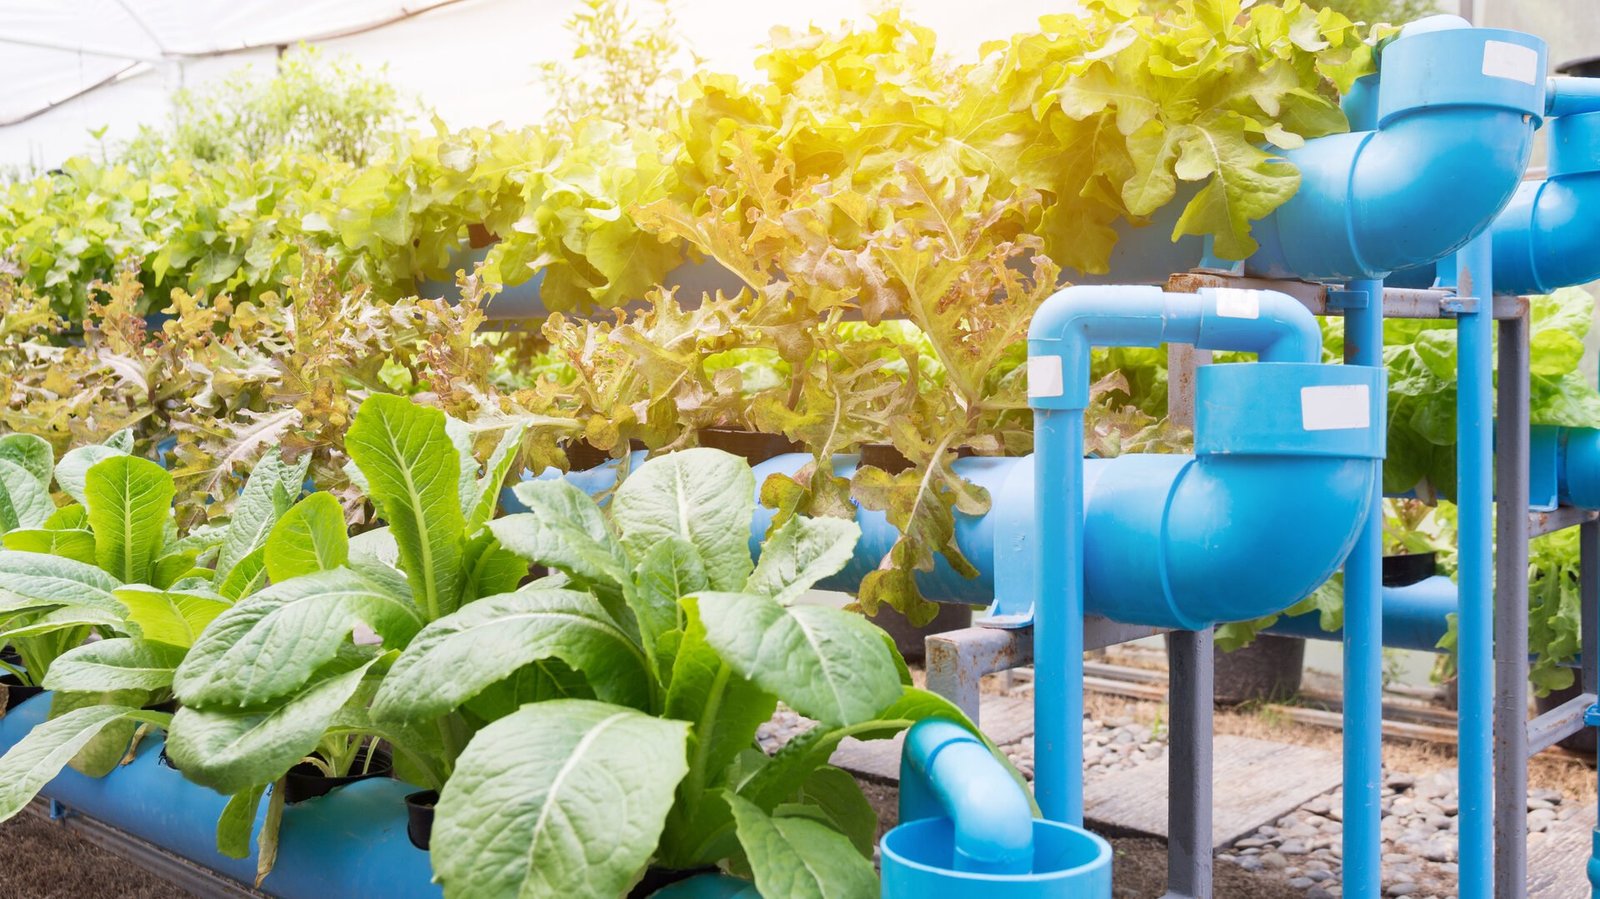 Hydroponics in a greenhouse with plants and pipes.